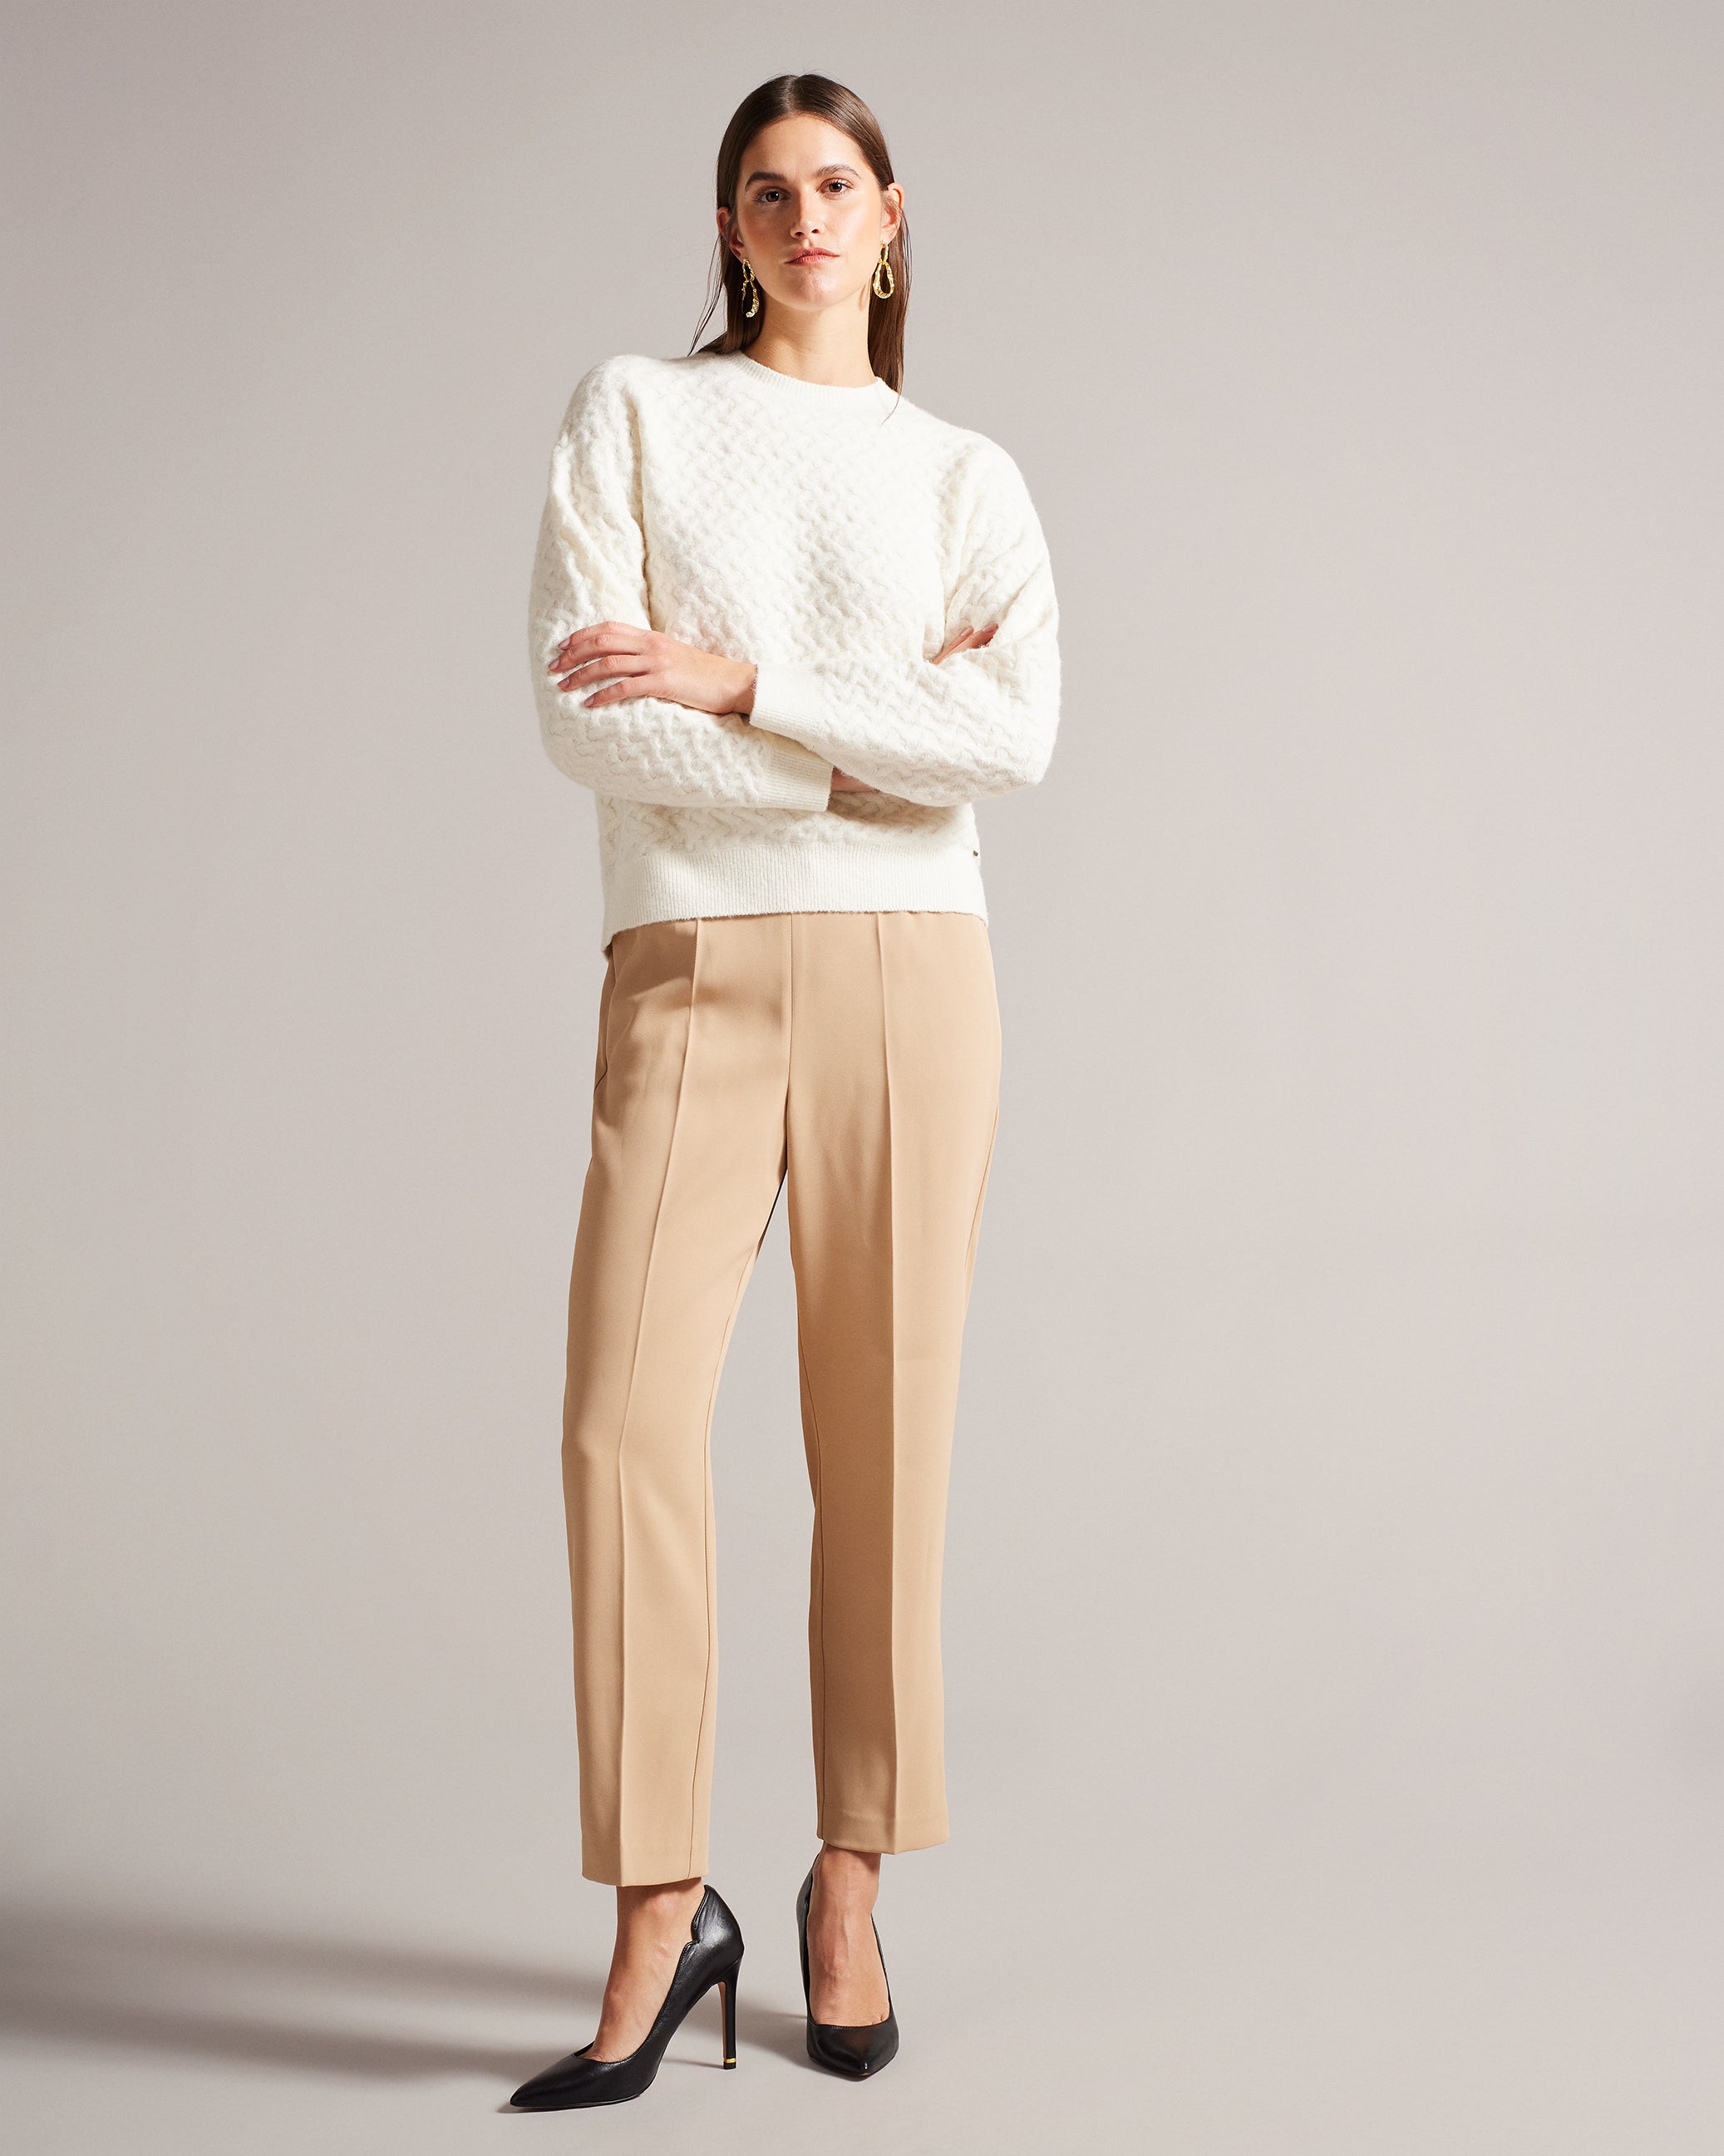 Morlea Horizontal Cable Relaxed Jumper Ivory